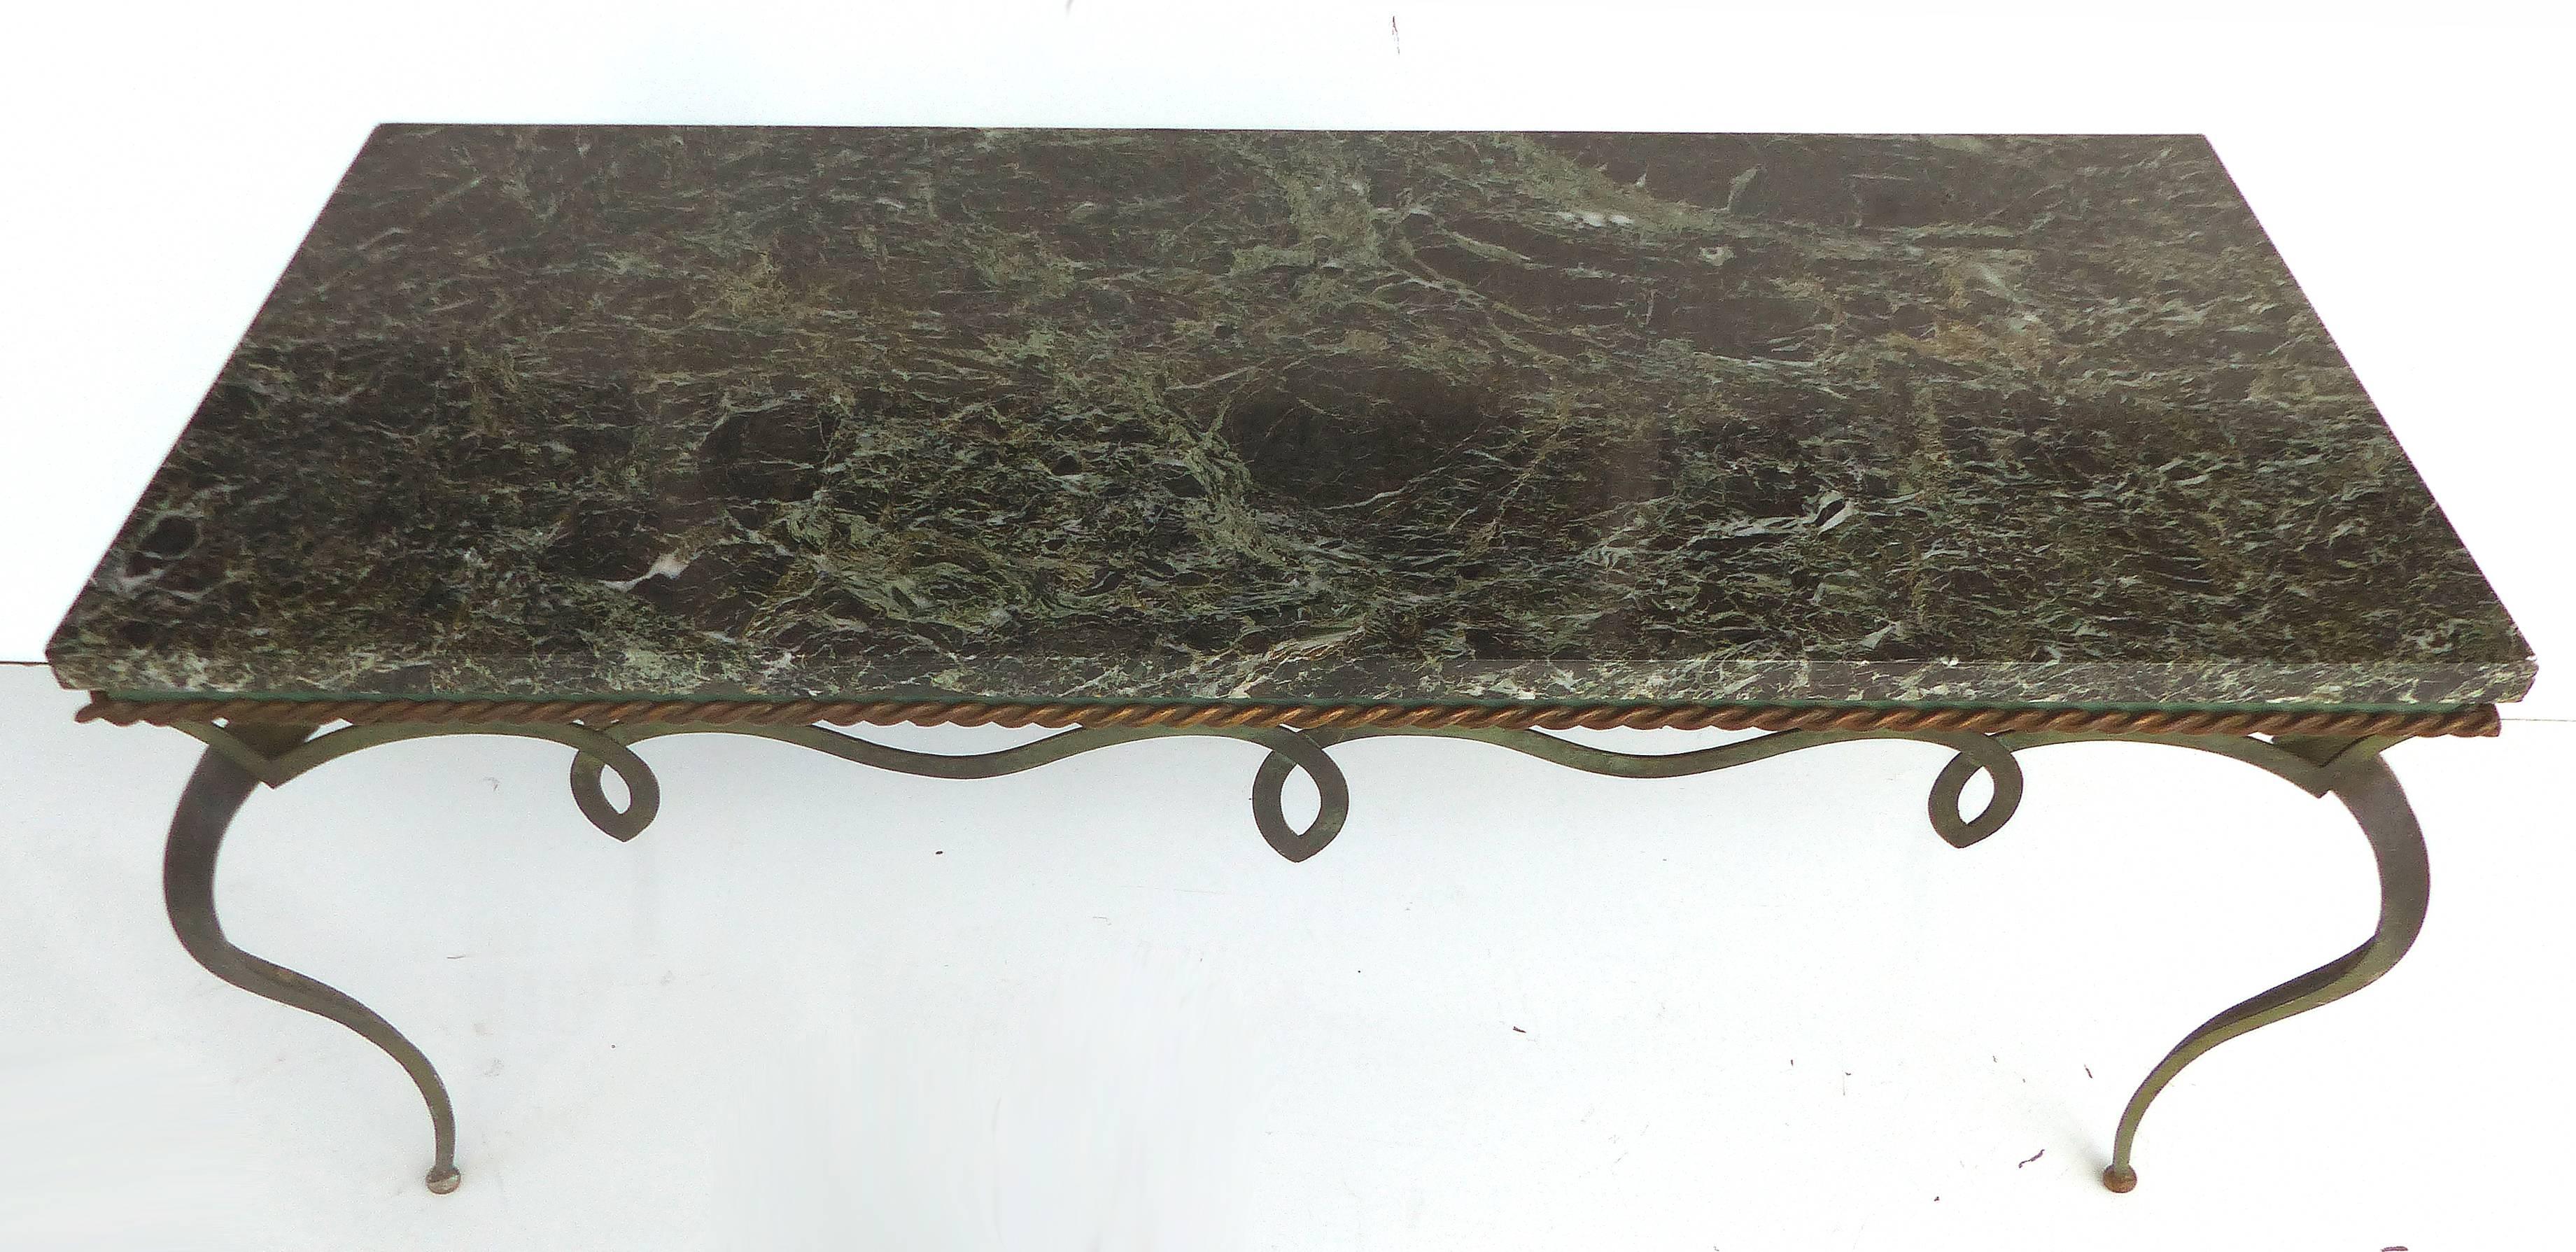 A forged iron coffee table in the style of Gilbert Poillerat with a dark green patina, gilt accents and green and black marble top, The table's flowing stylized legs have a French flair. The marble is 1": thick.

 